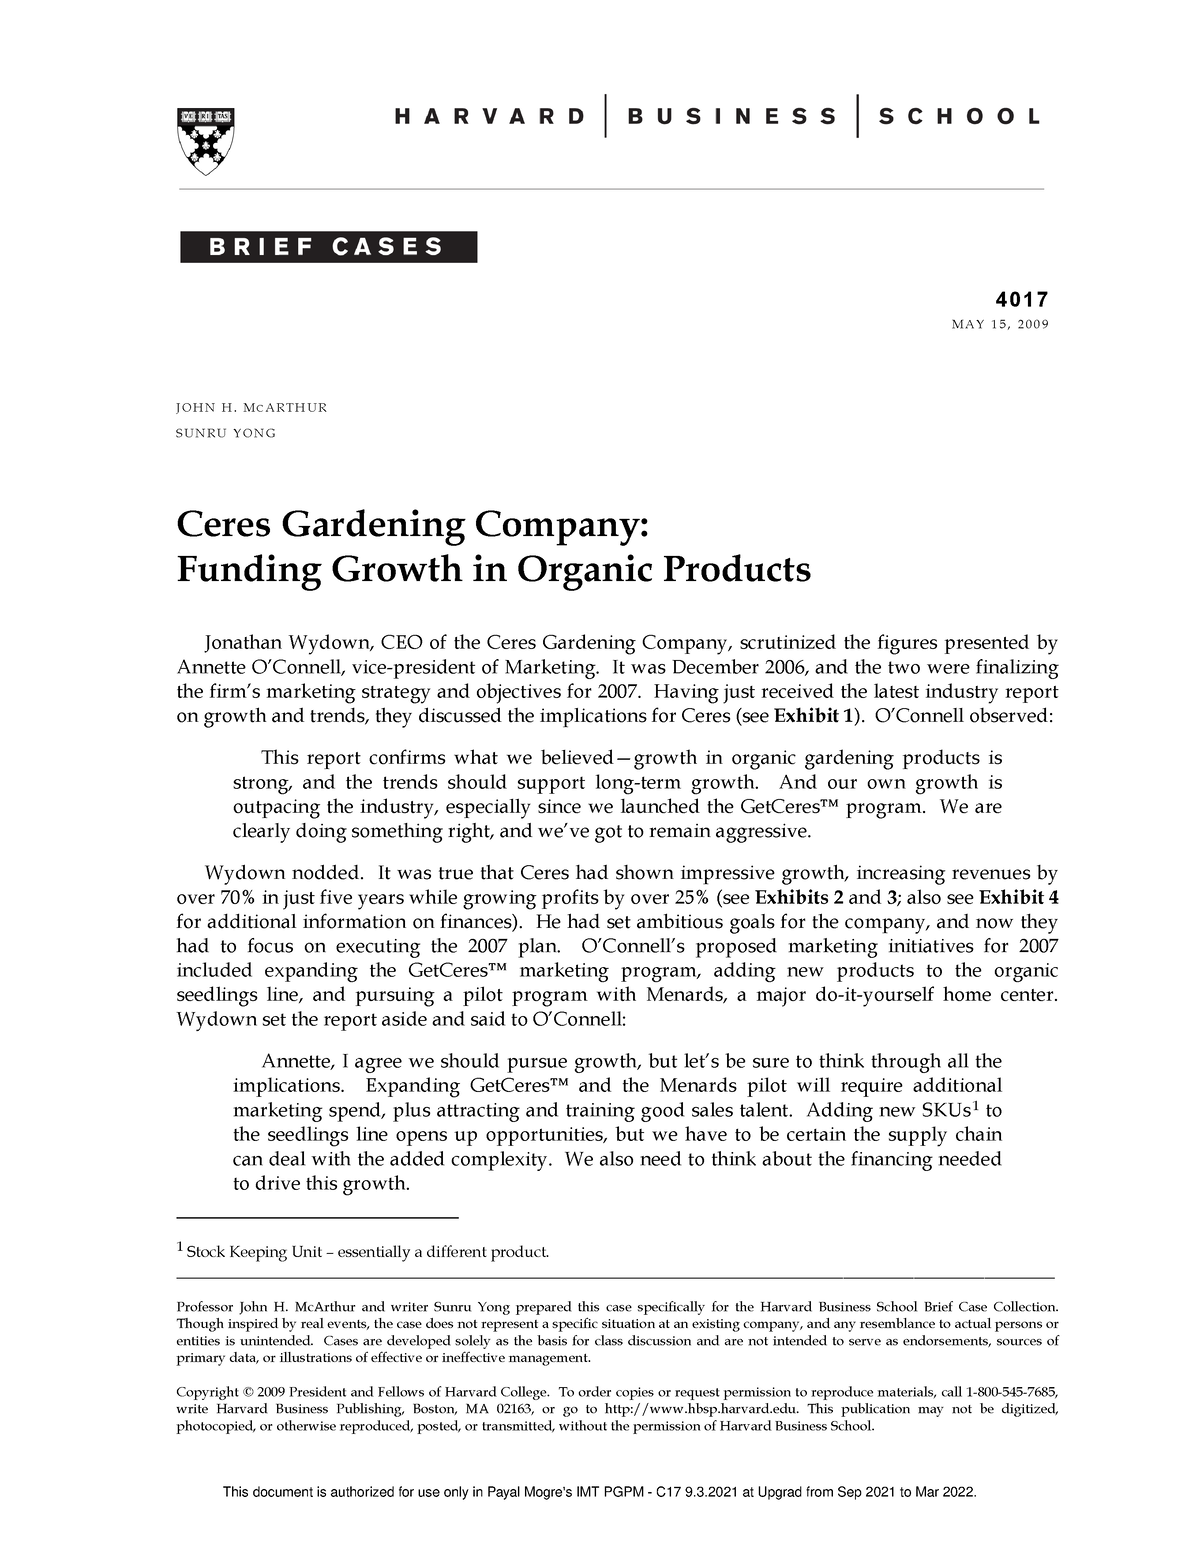 ceres gardening company funding growth in organic products case solution